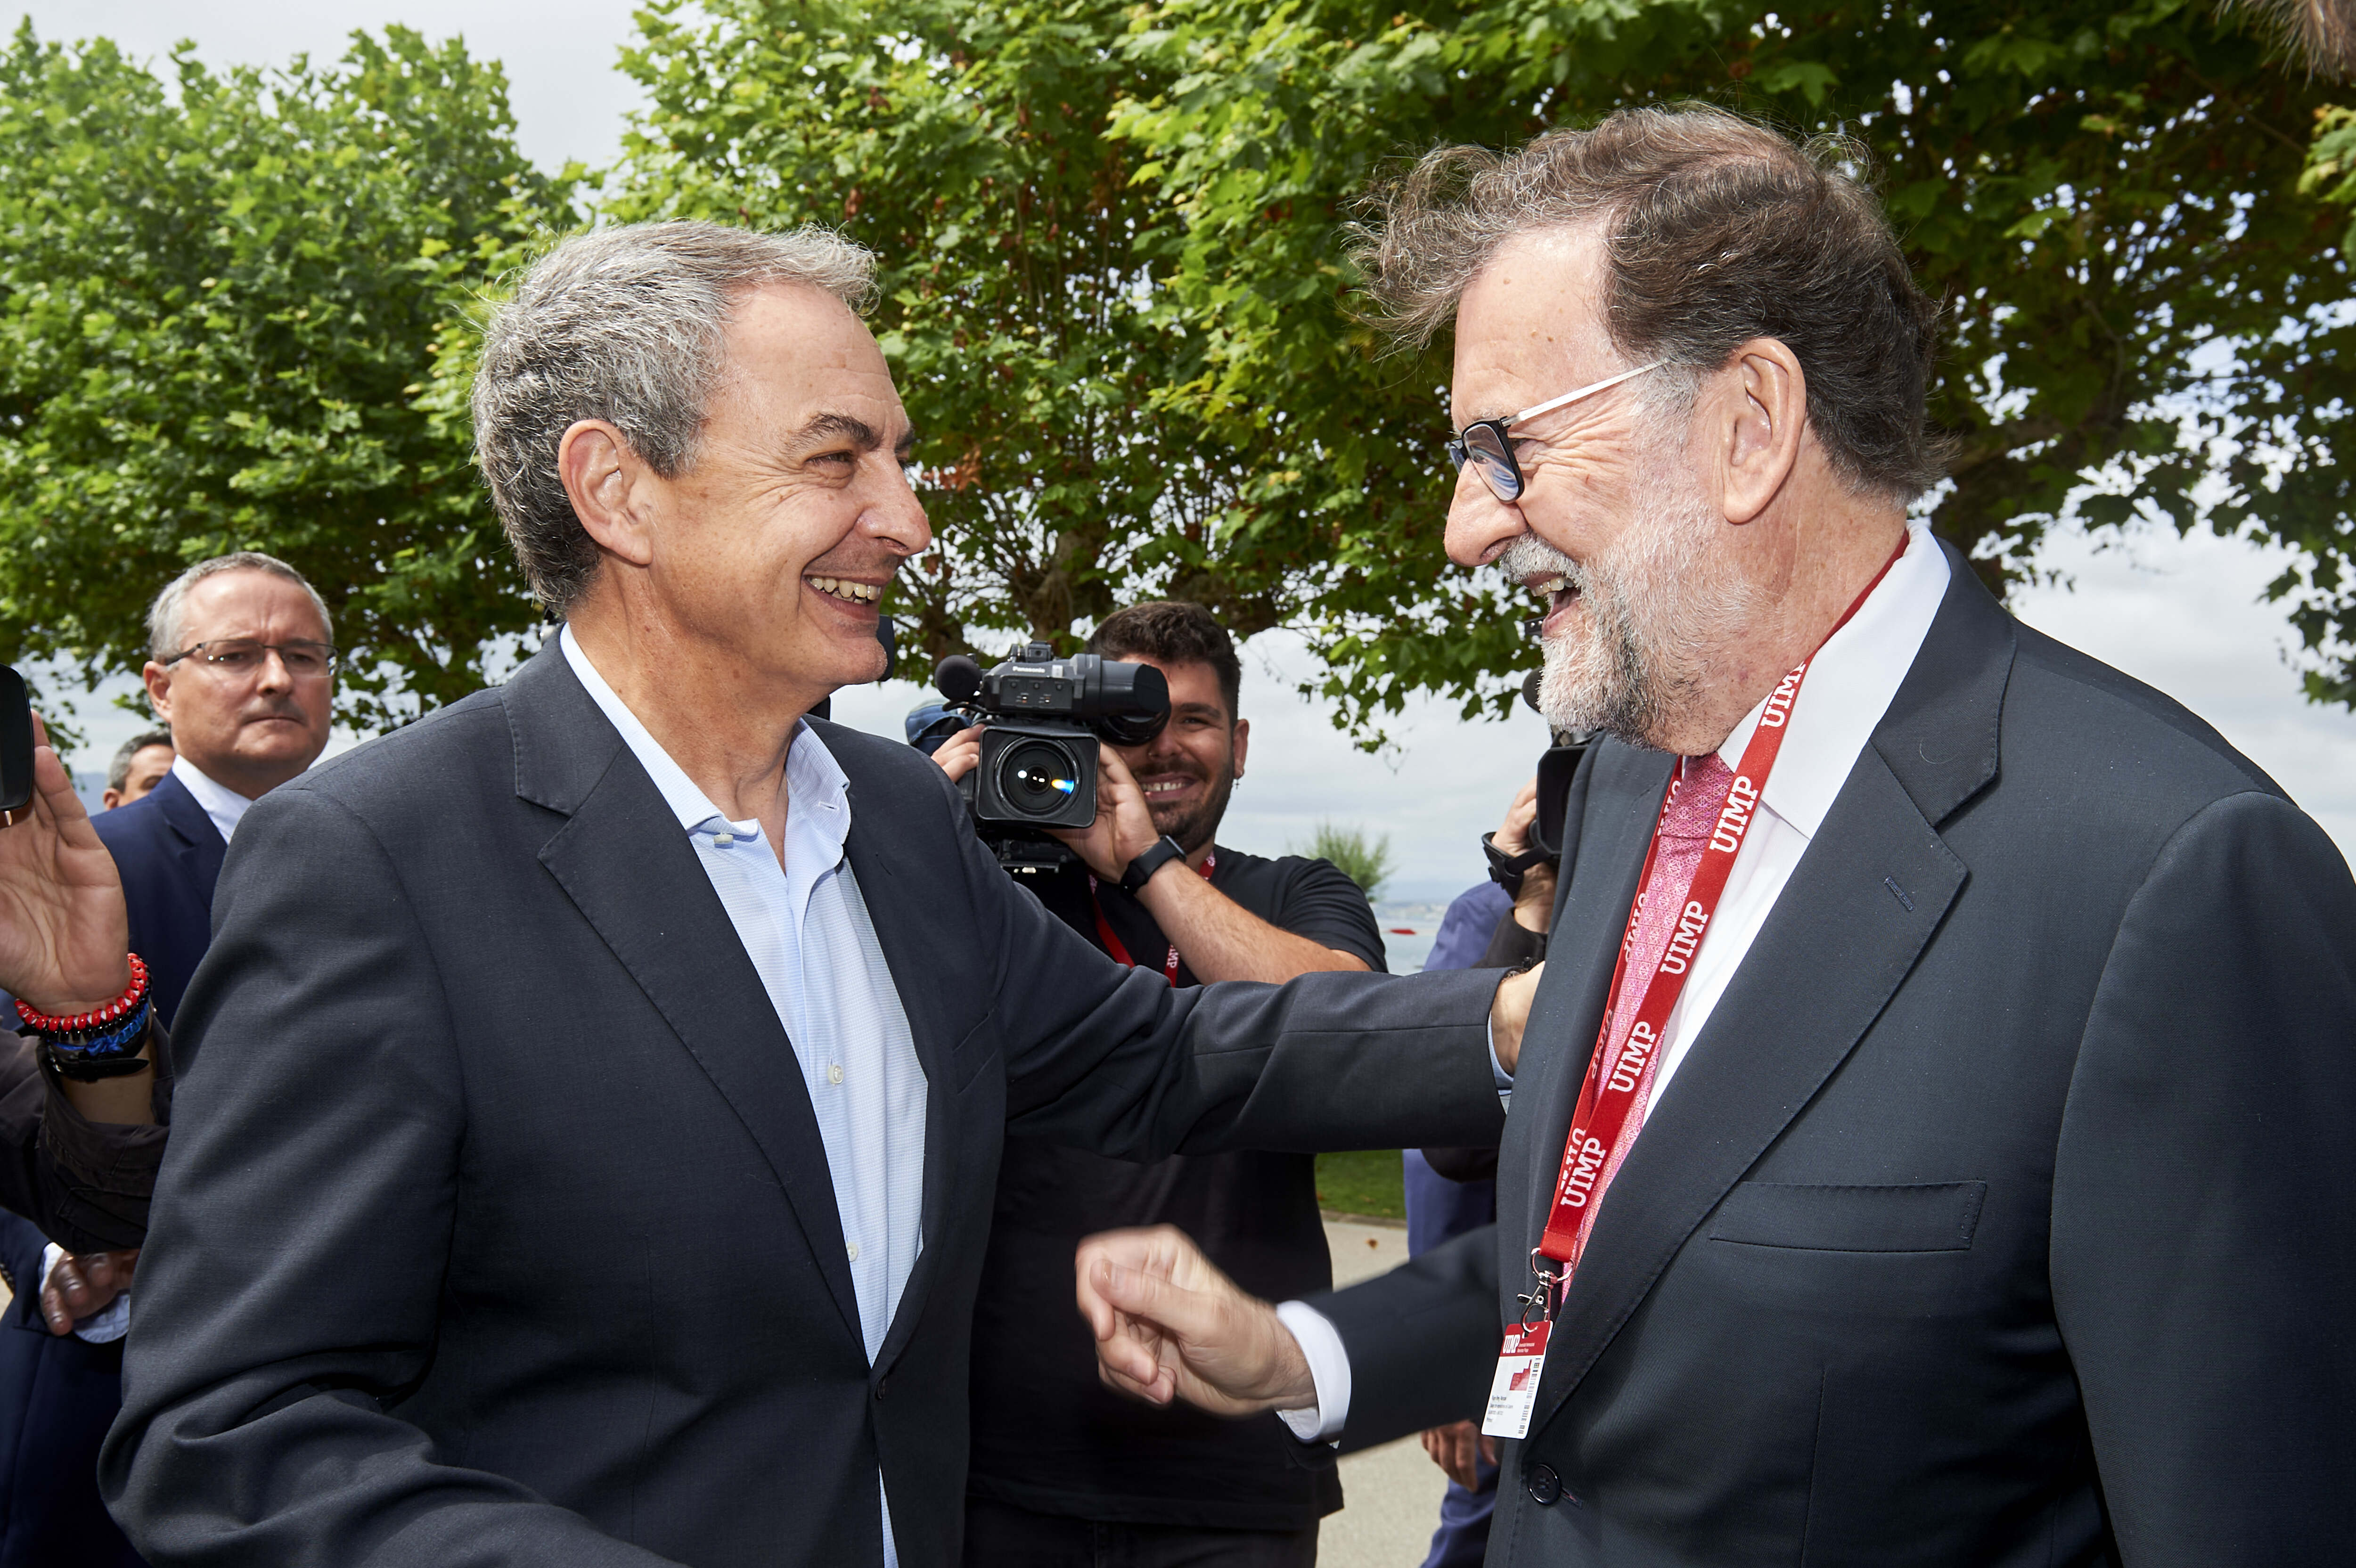 How did we get here, Mariano? The five key episodes in Spain’s 21st century electoral politics